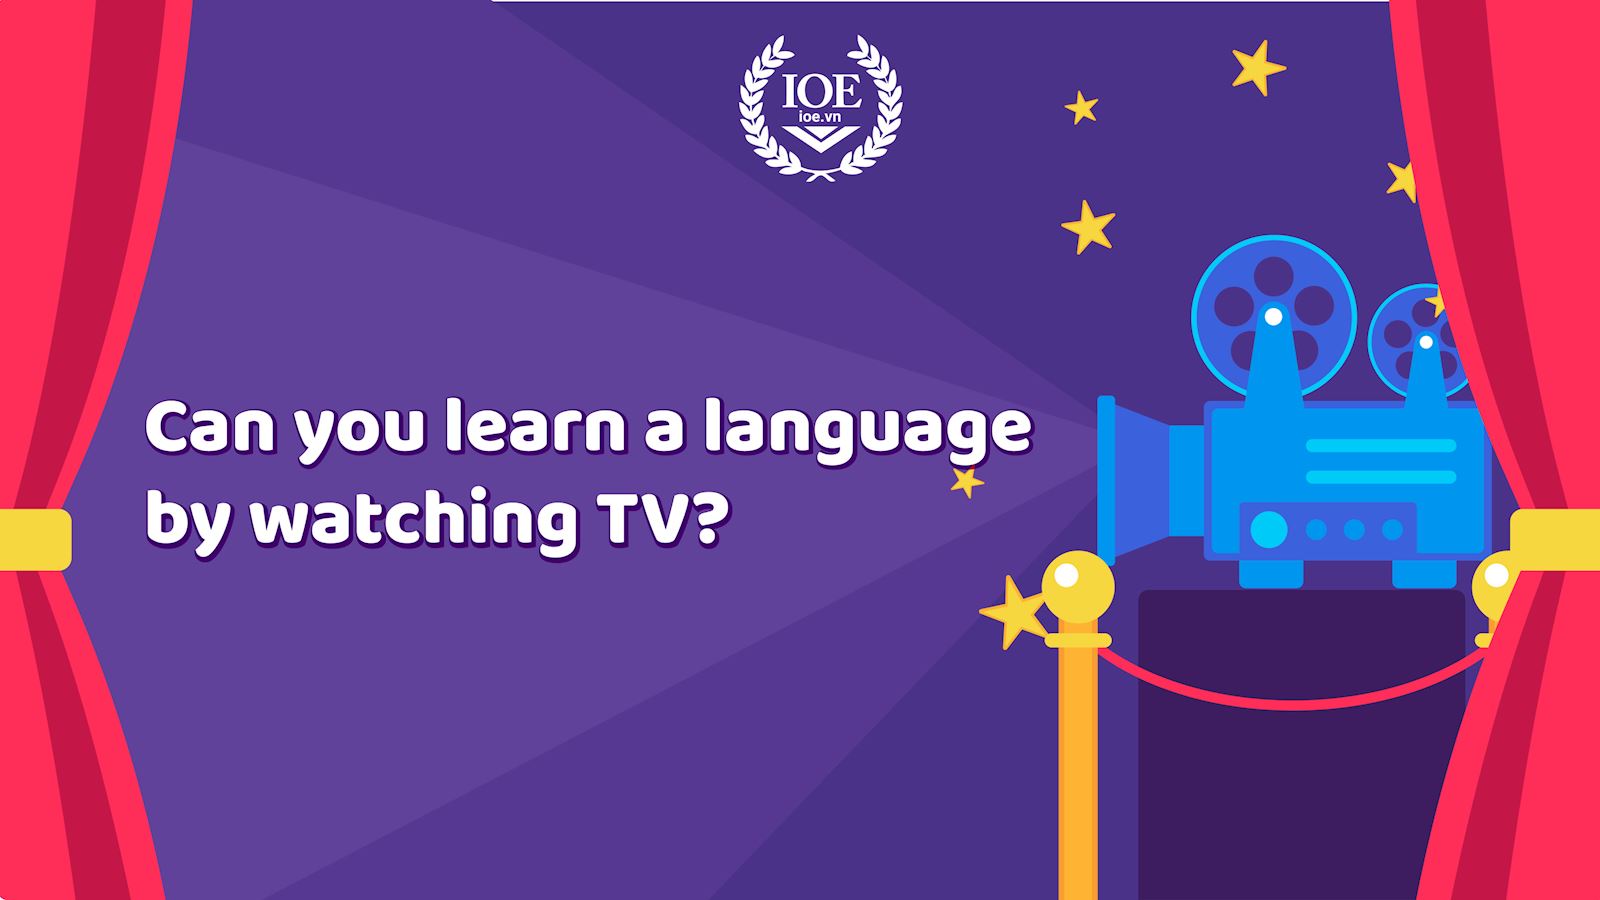 Can you learn a language by watching TV?